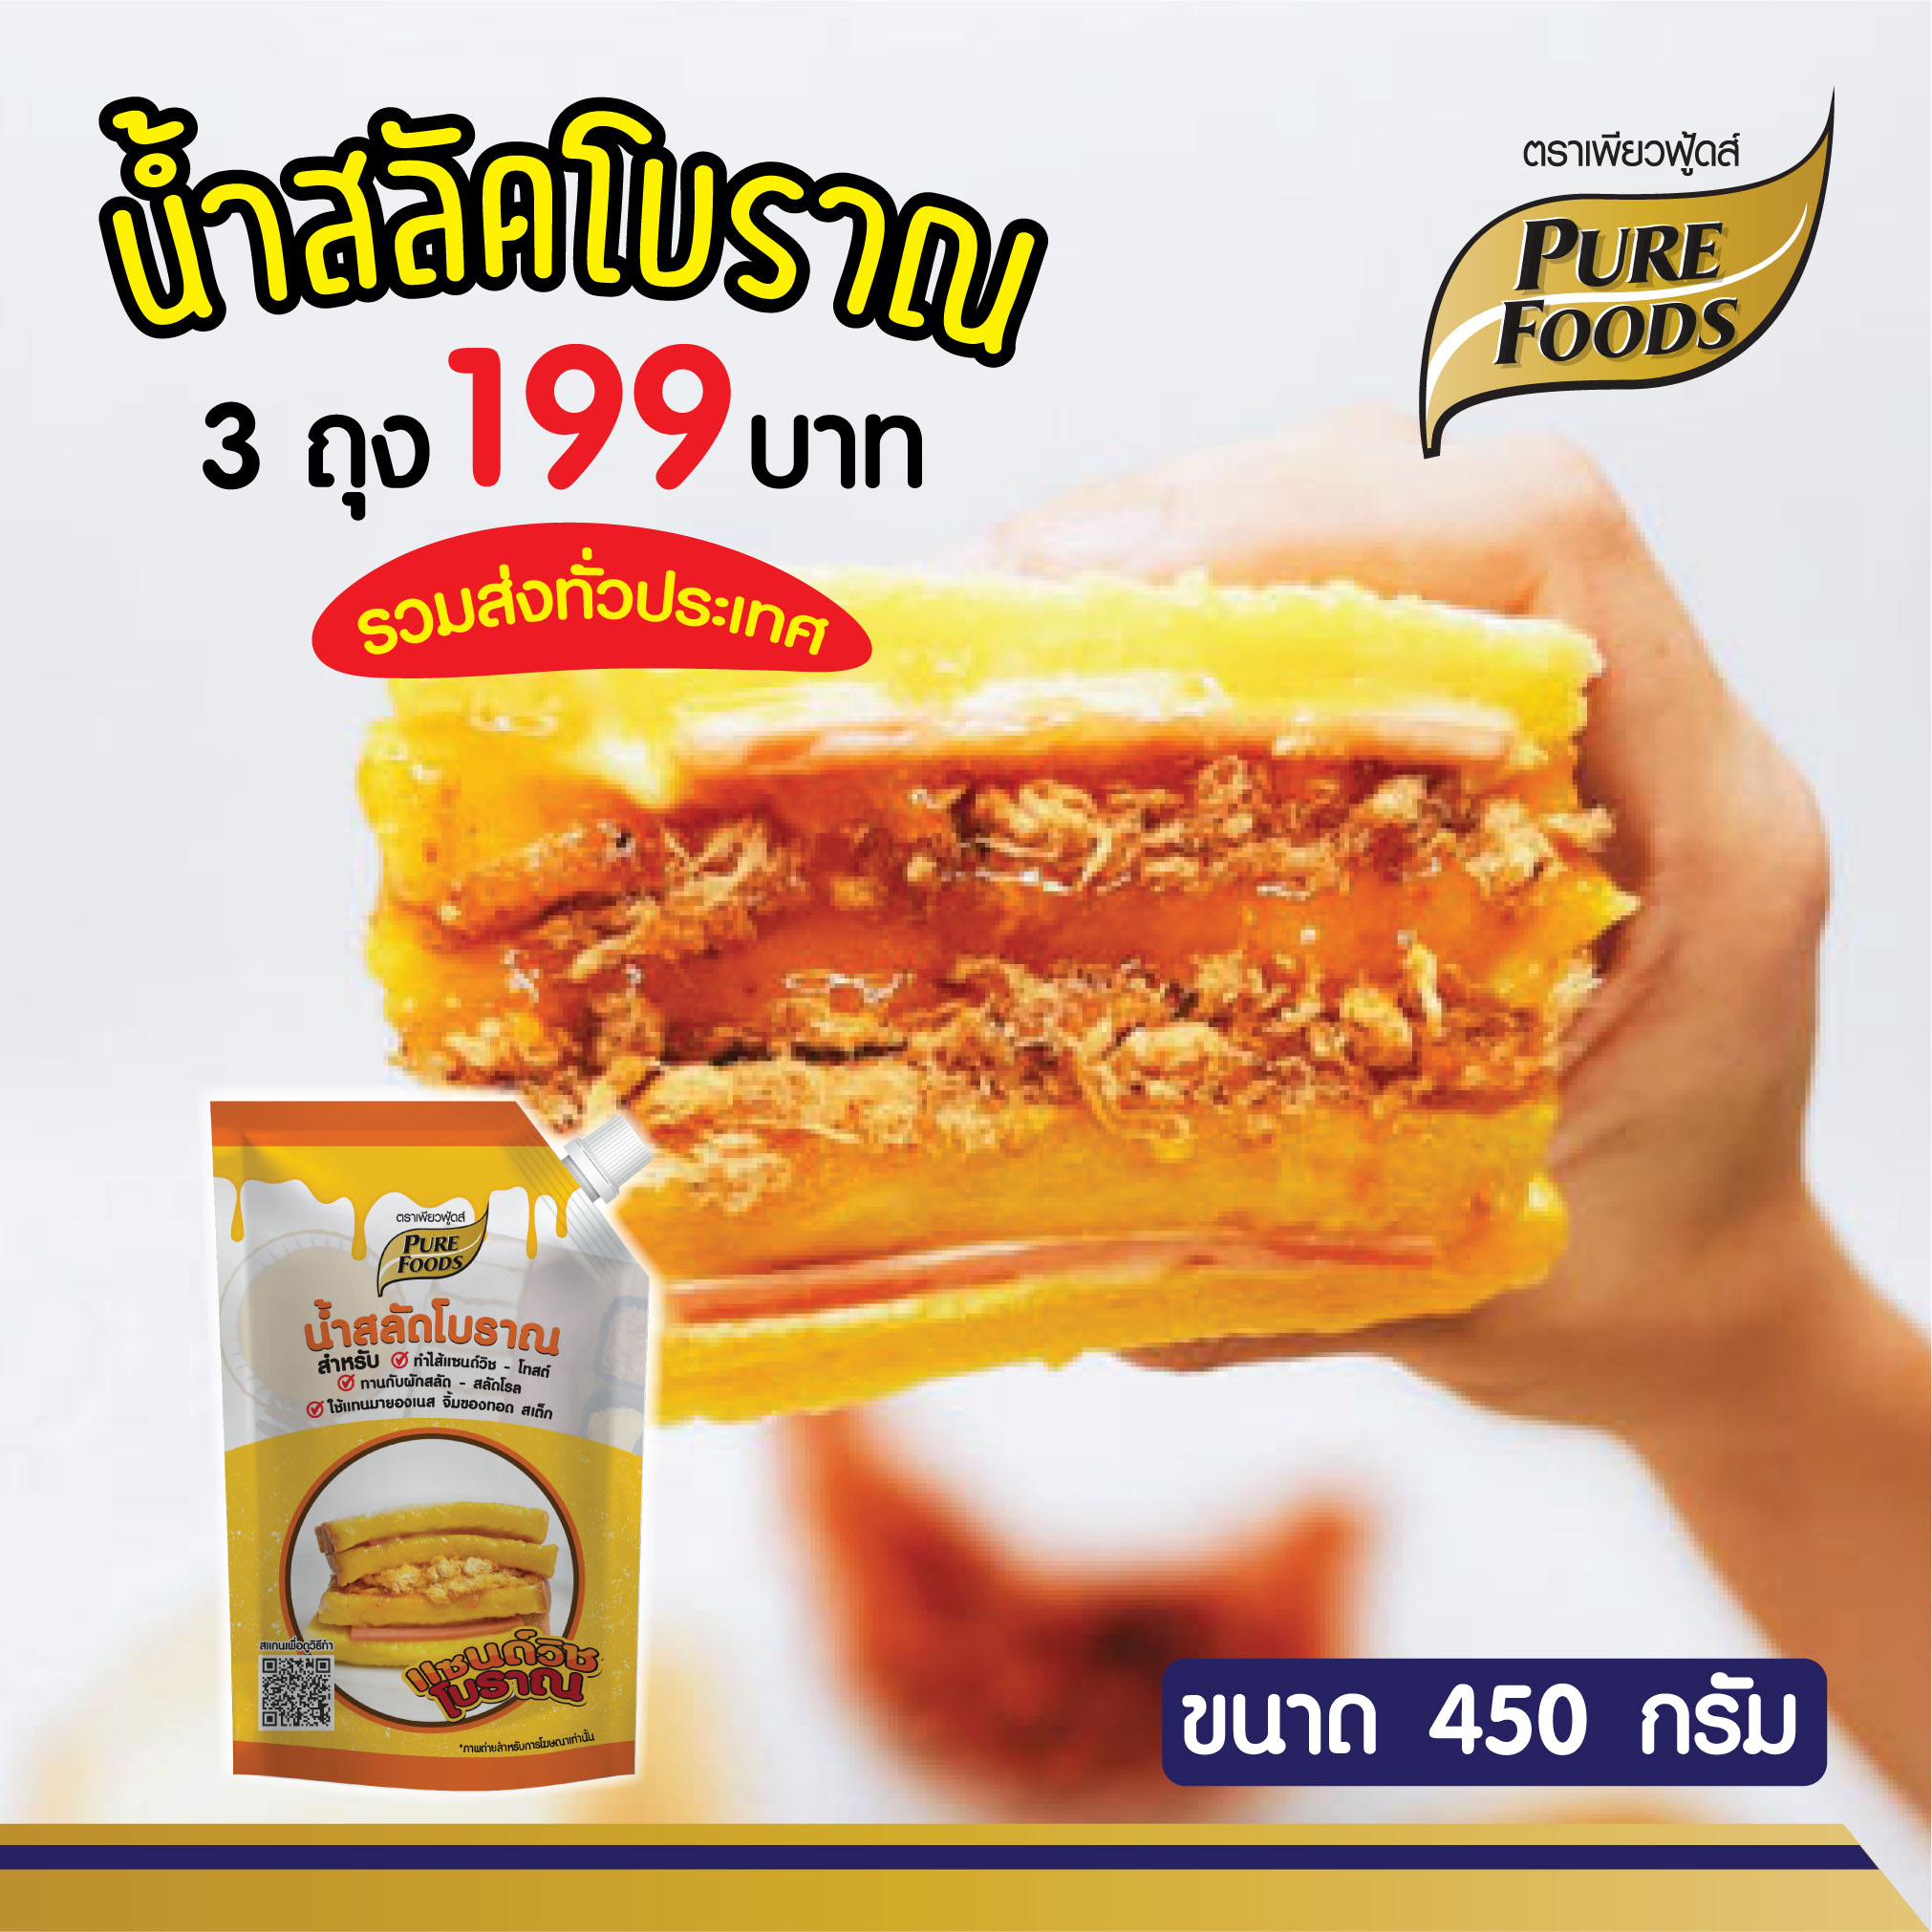 Boran Salad Dressing 450 g.(THB 199 for 3 packs and  - Free Delivery in Thailand)